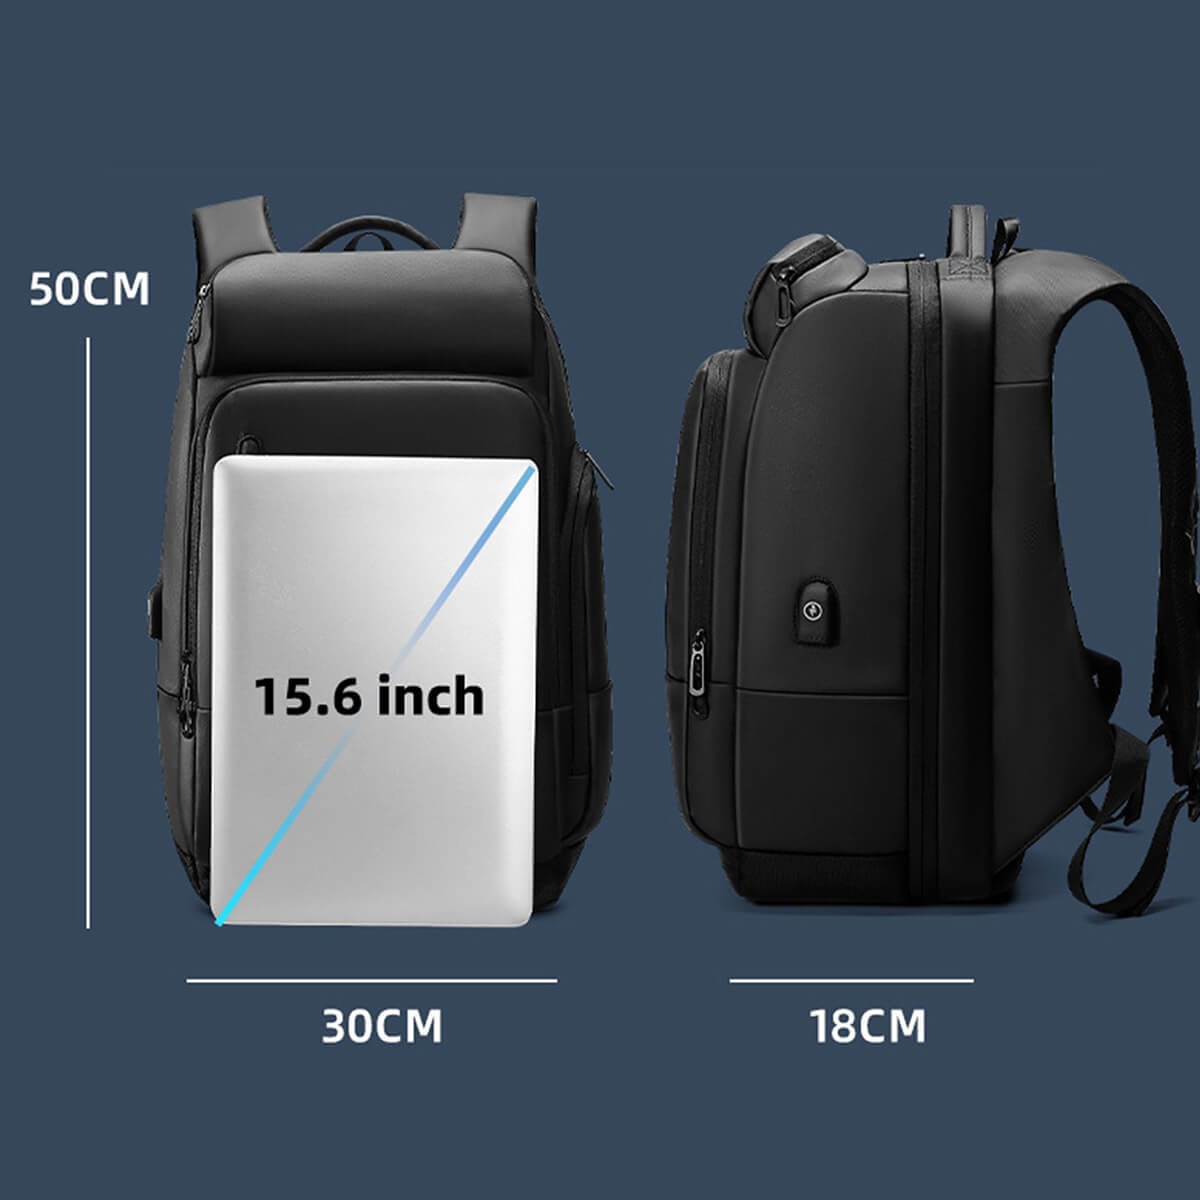 Large laptop backpack size comparison with laptop